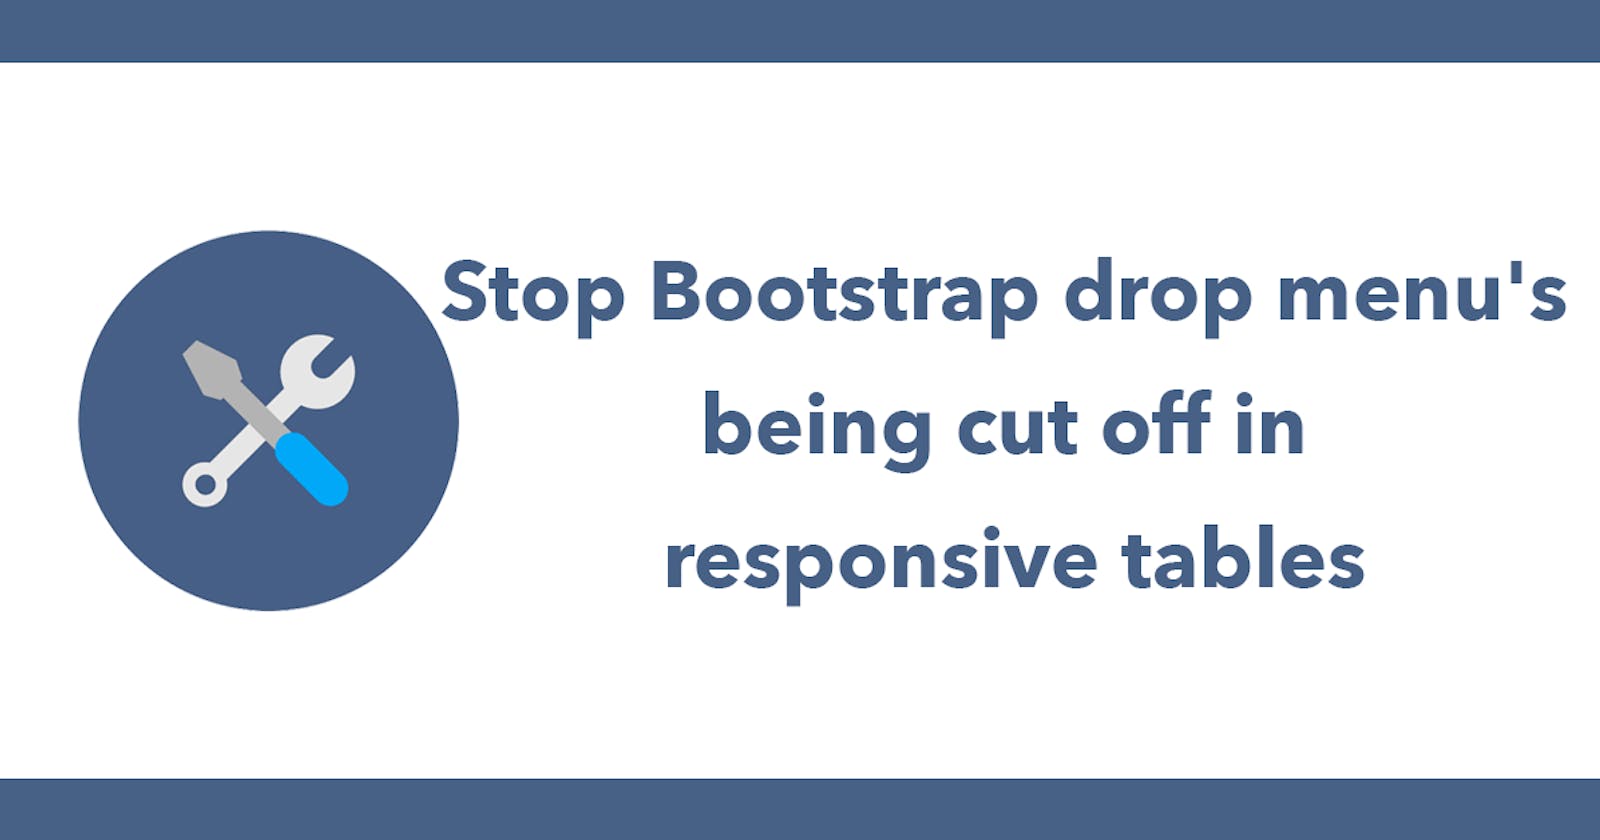 Stop Bootstrap drop menu's being cut off in responsive tables